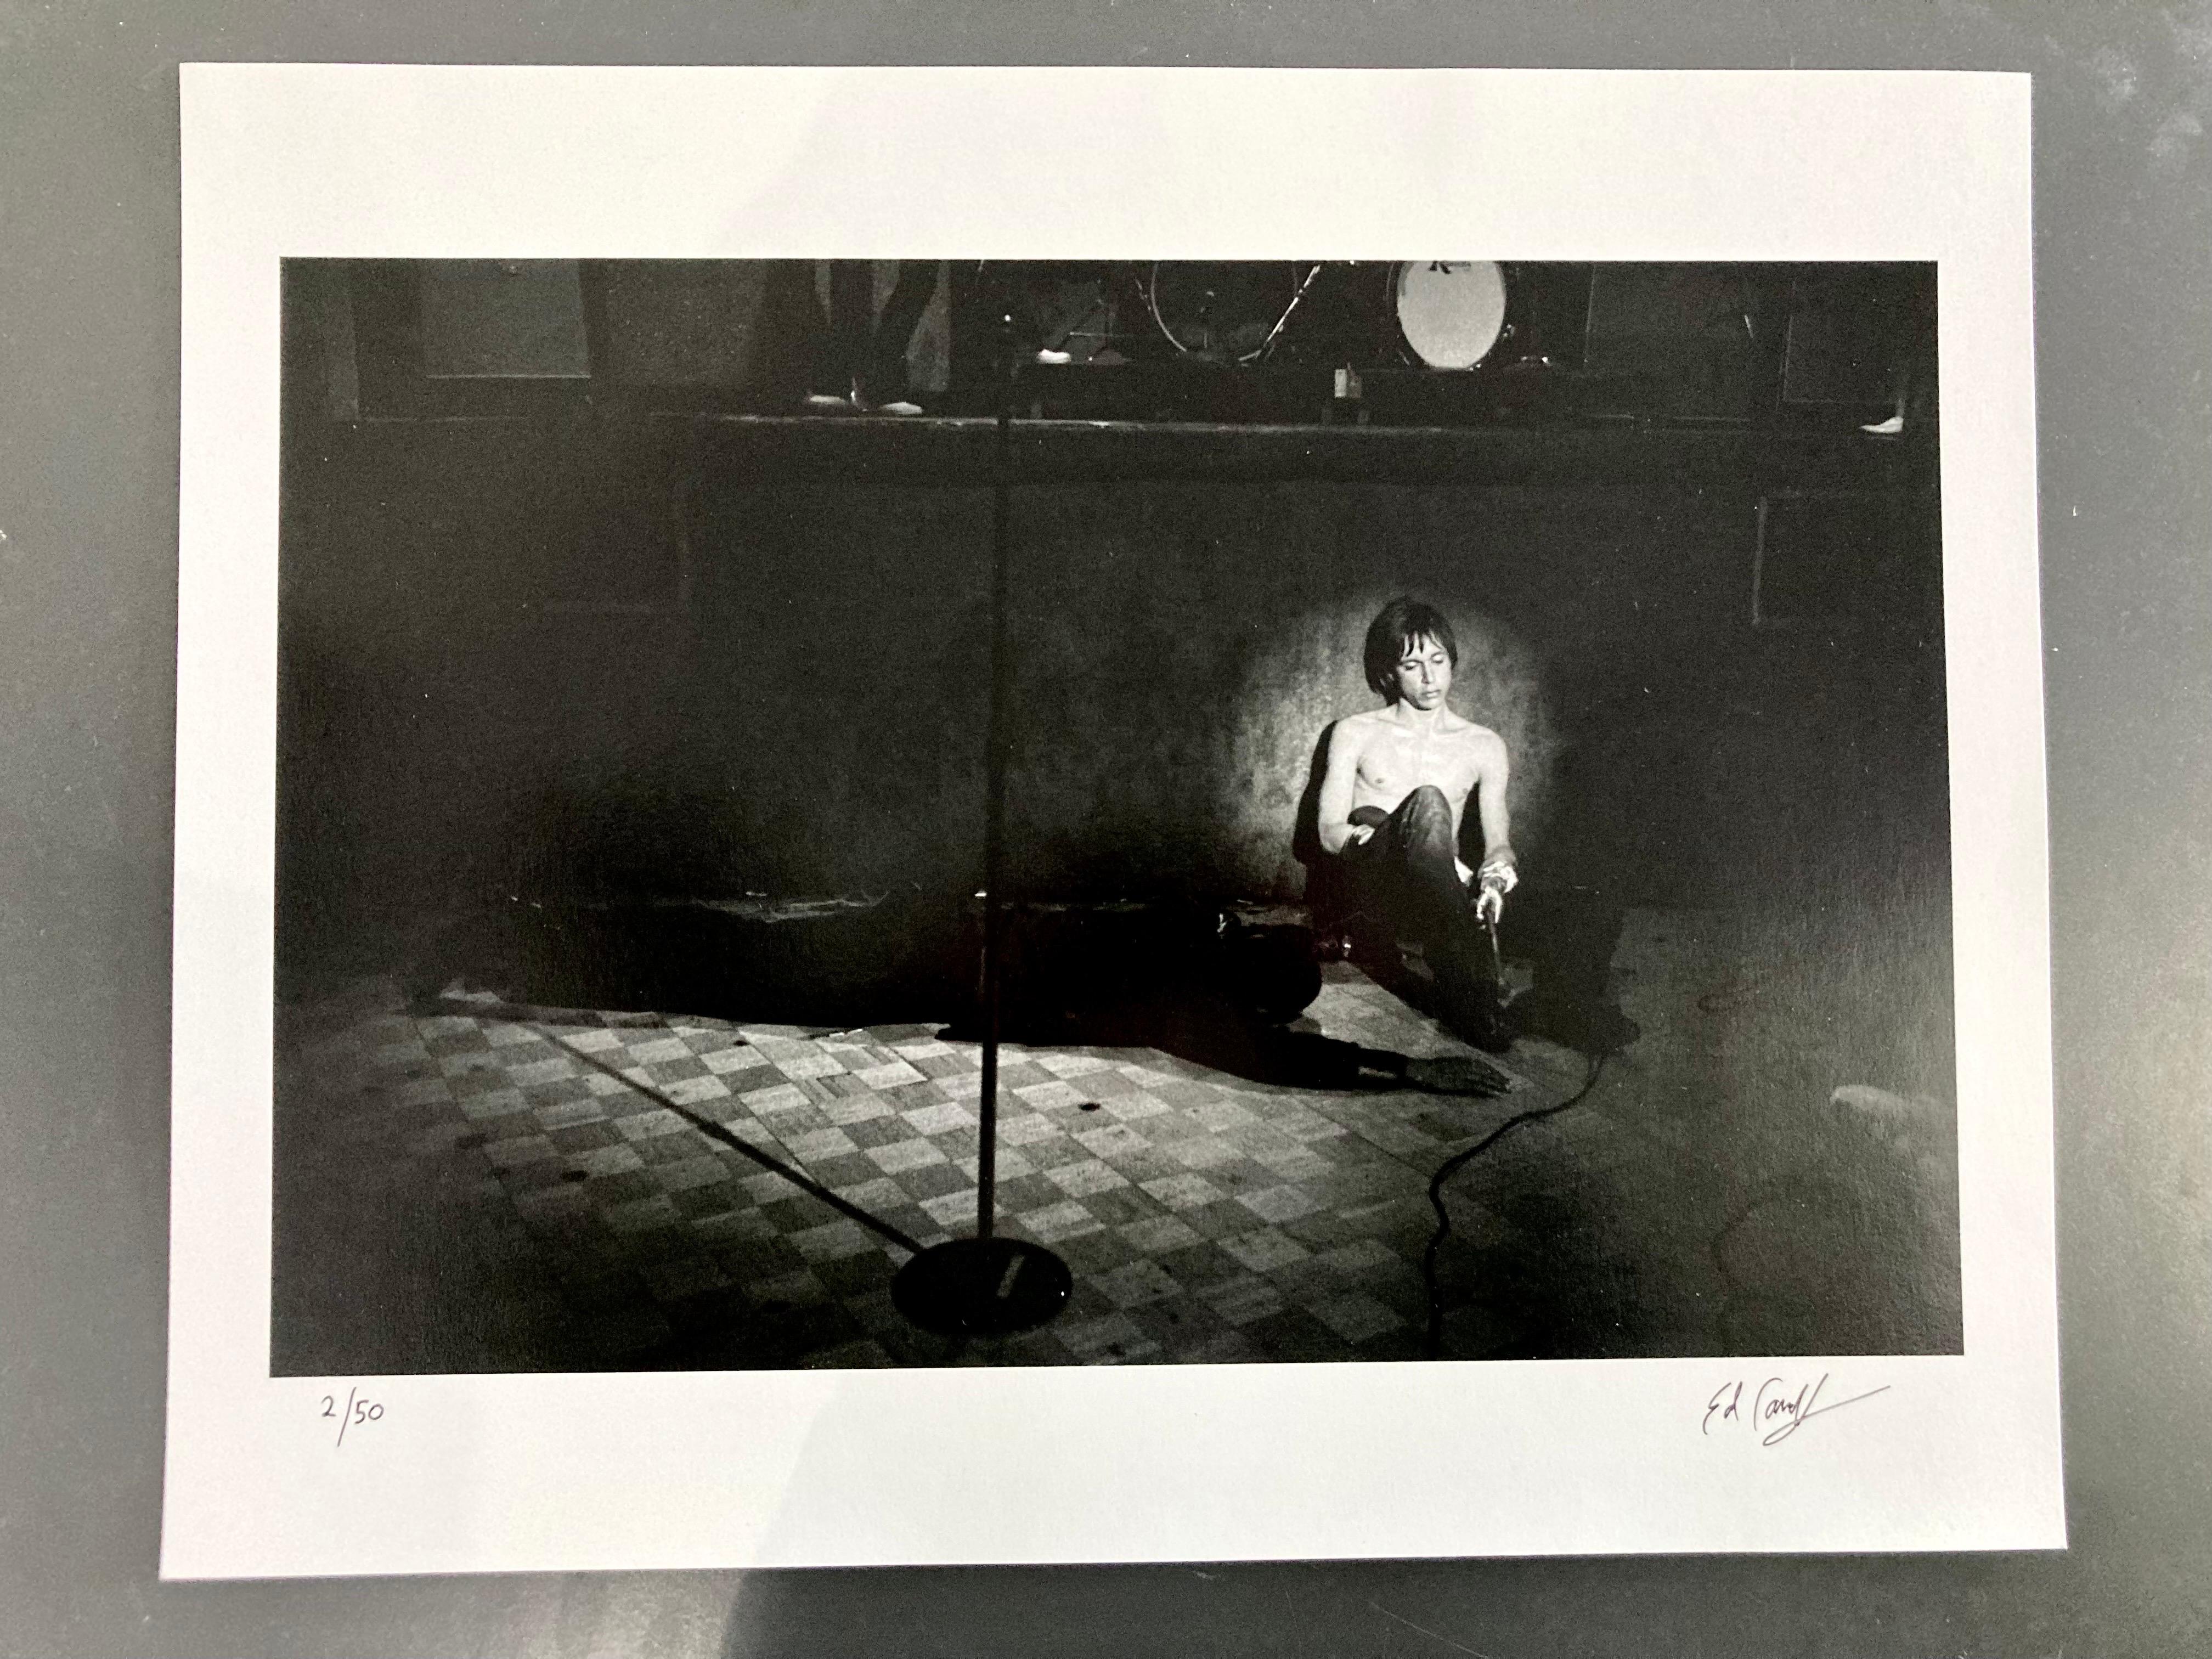 Signed limited edition. print by Ed Caraeff of Iggy Pop taken during a Stooges show at Whisky a Go Go, Los Angeles, CA, US, May 1970 by celebrated photographer, Ed Caraeff

Signed limited edition print number 2/50

This stunning print is also